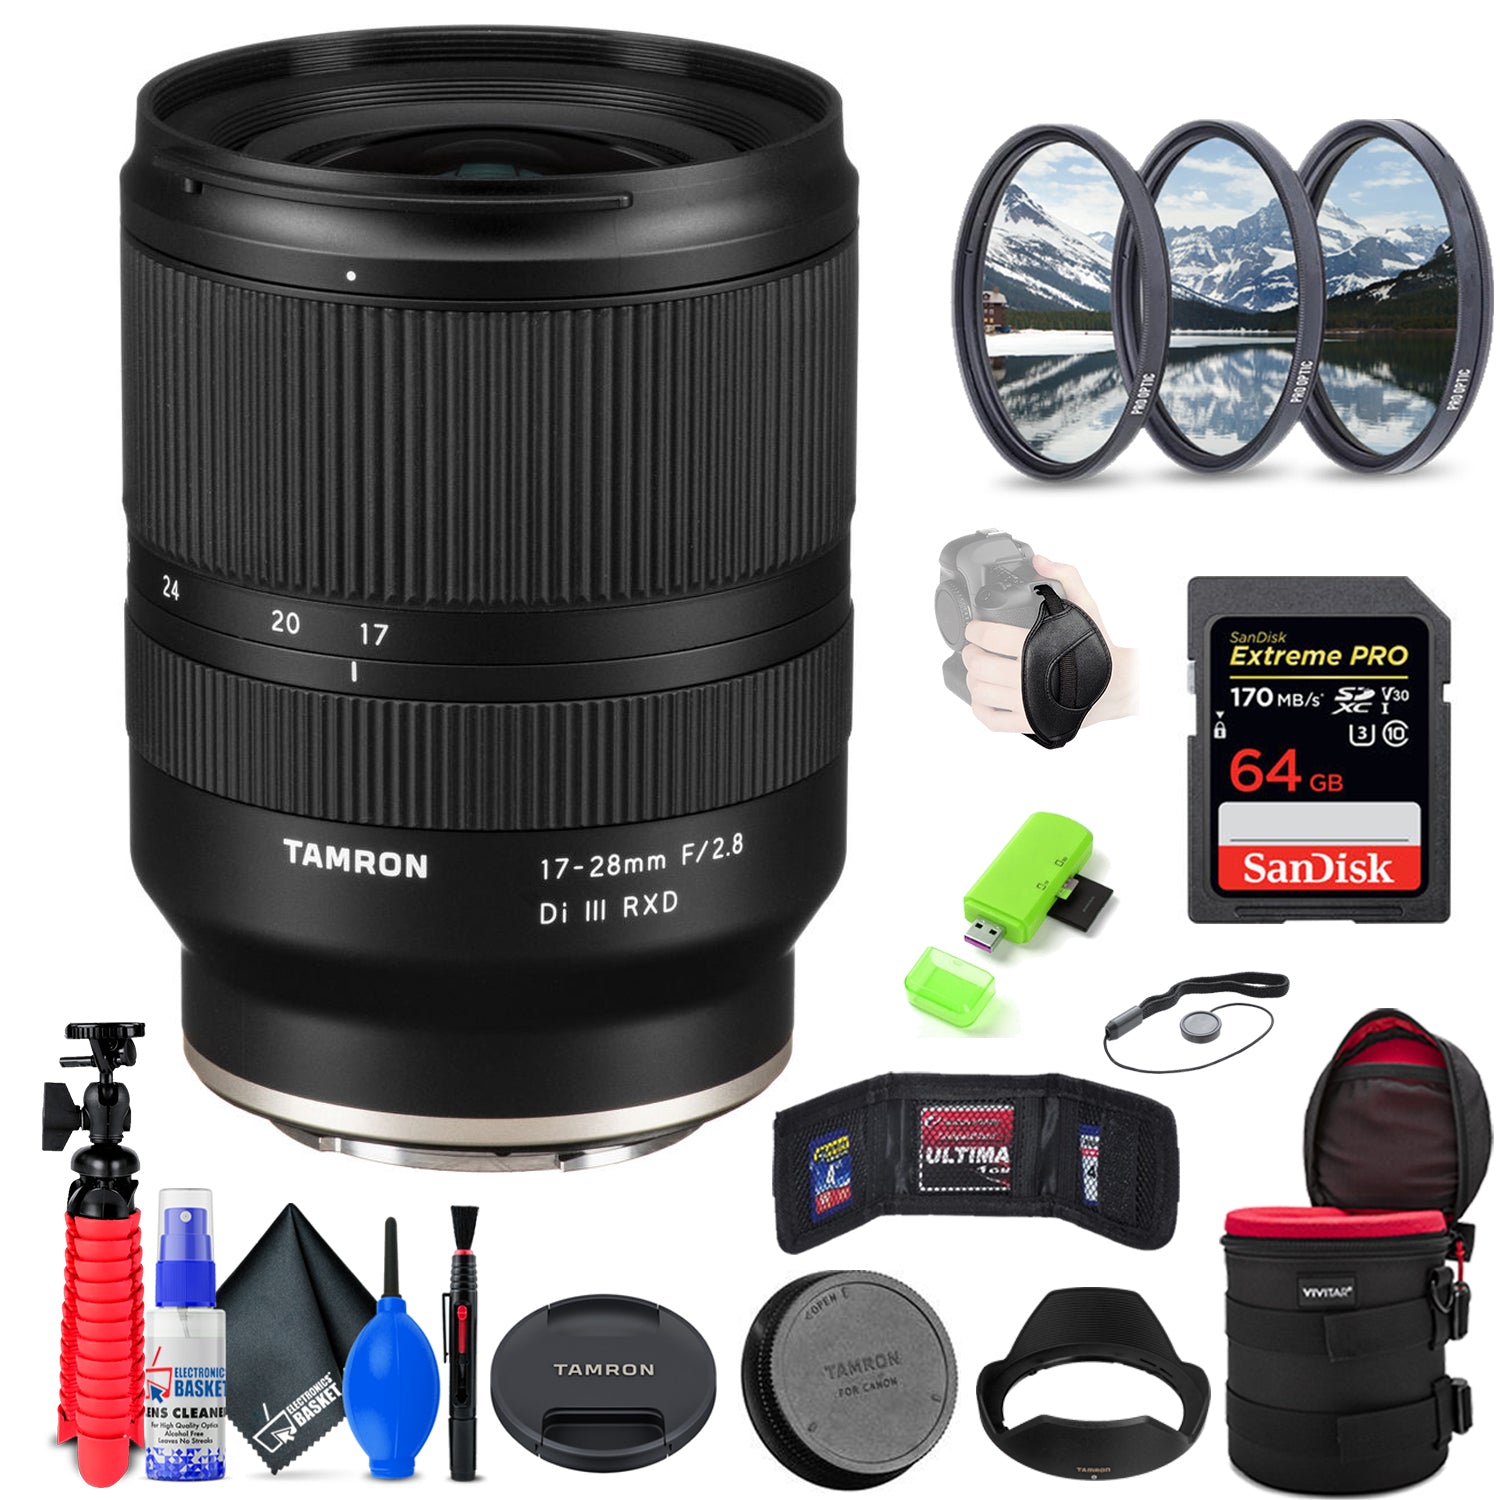 Tamron 17-28mm f/2.8 Di III RXD Lens for Sony E + Accessories (INTL Mo